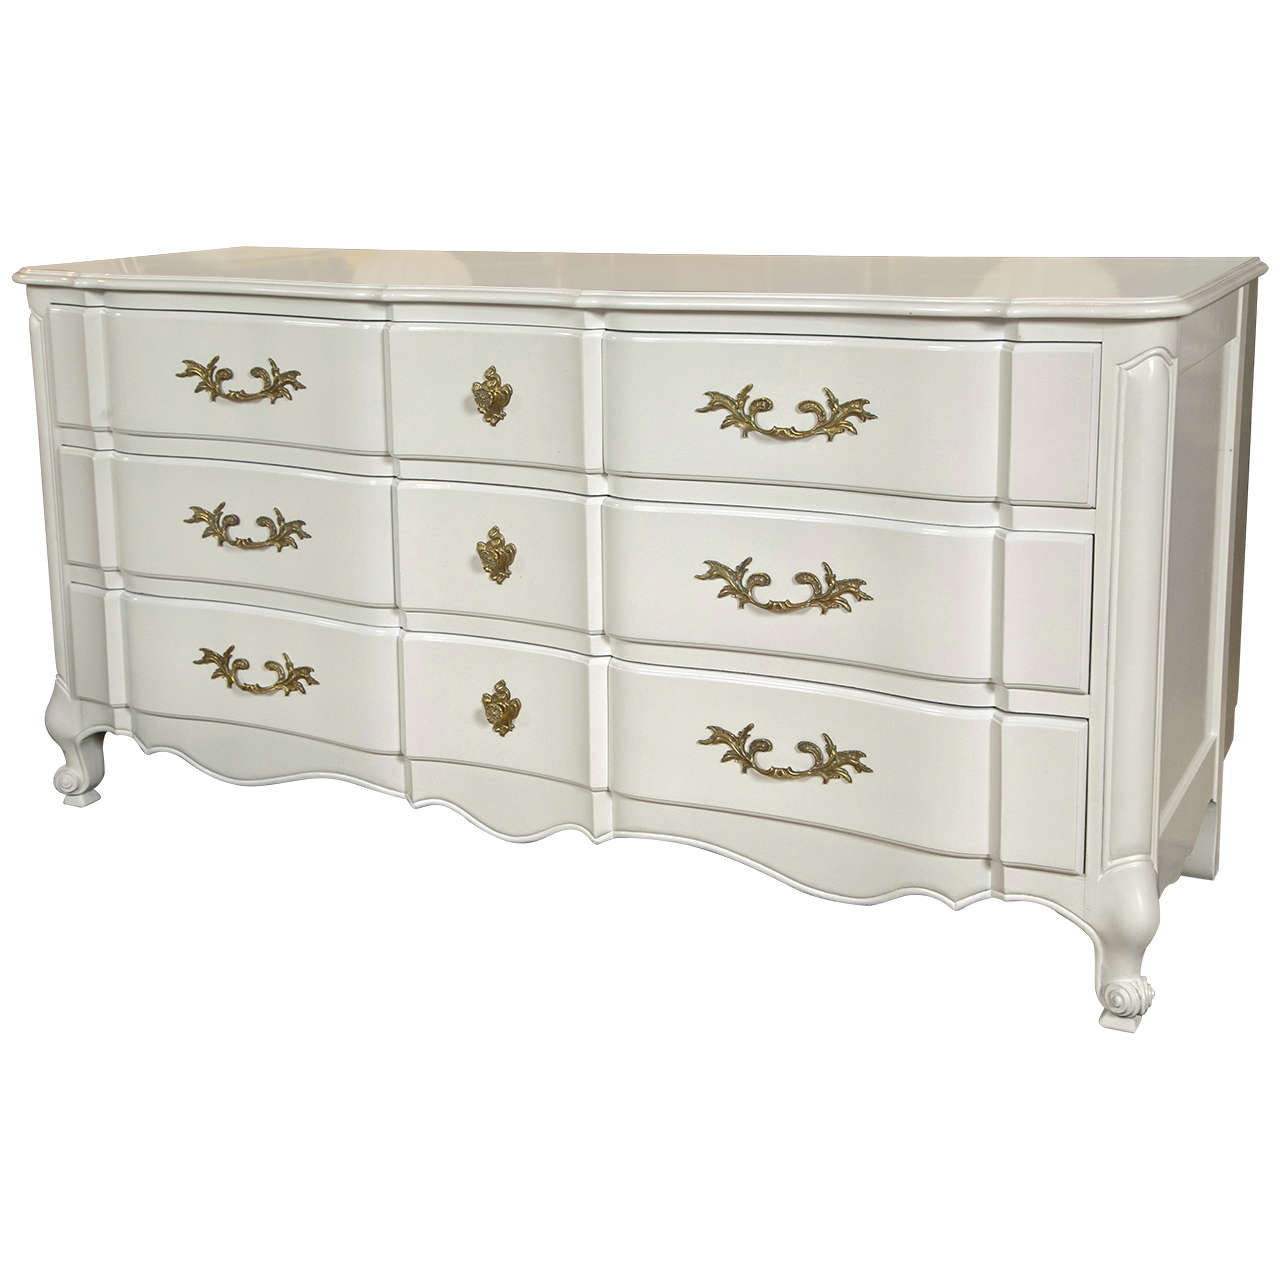 French Provincial Style Dresser By Bodart At 1stdibs